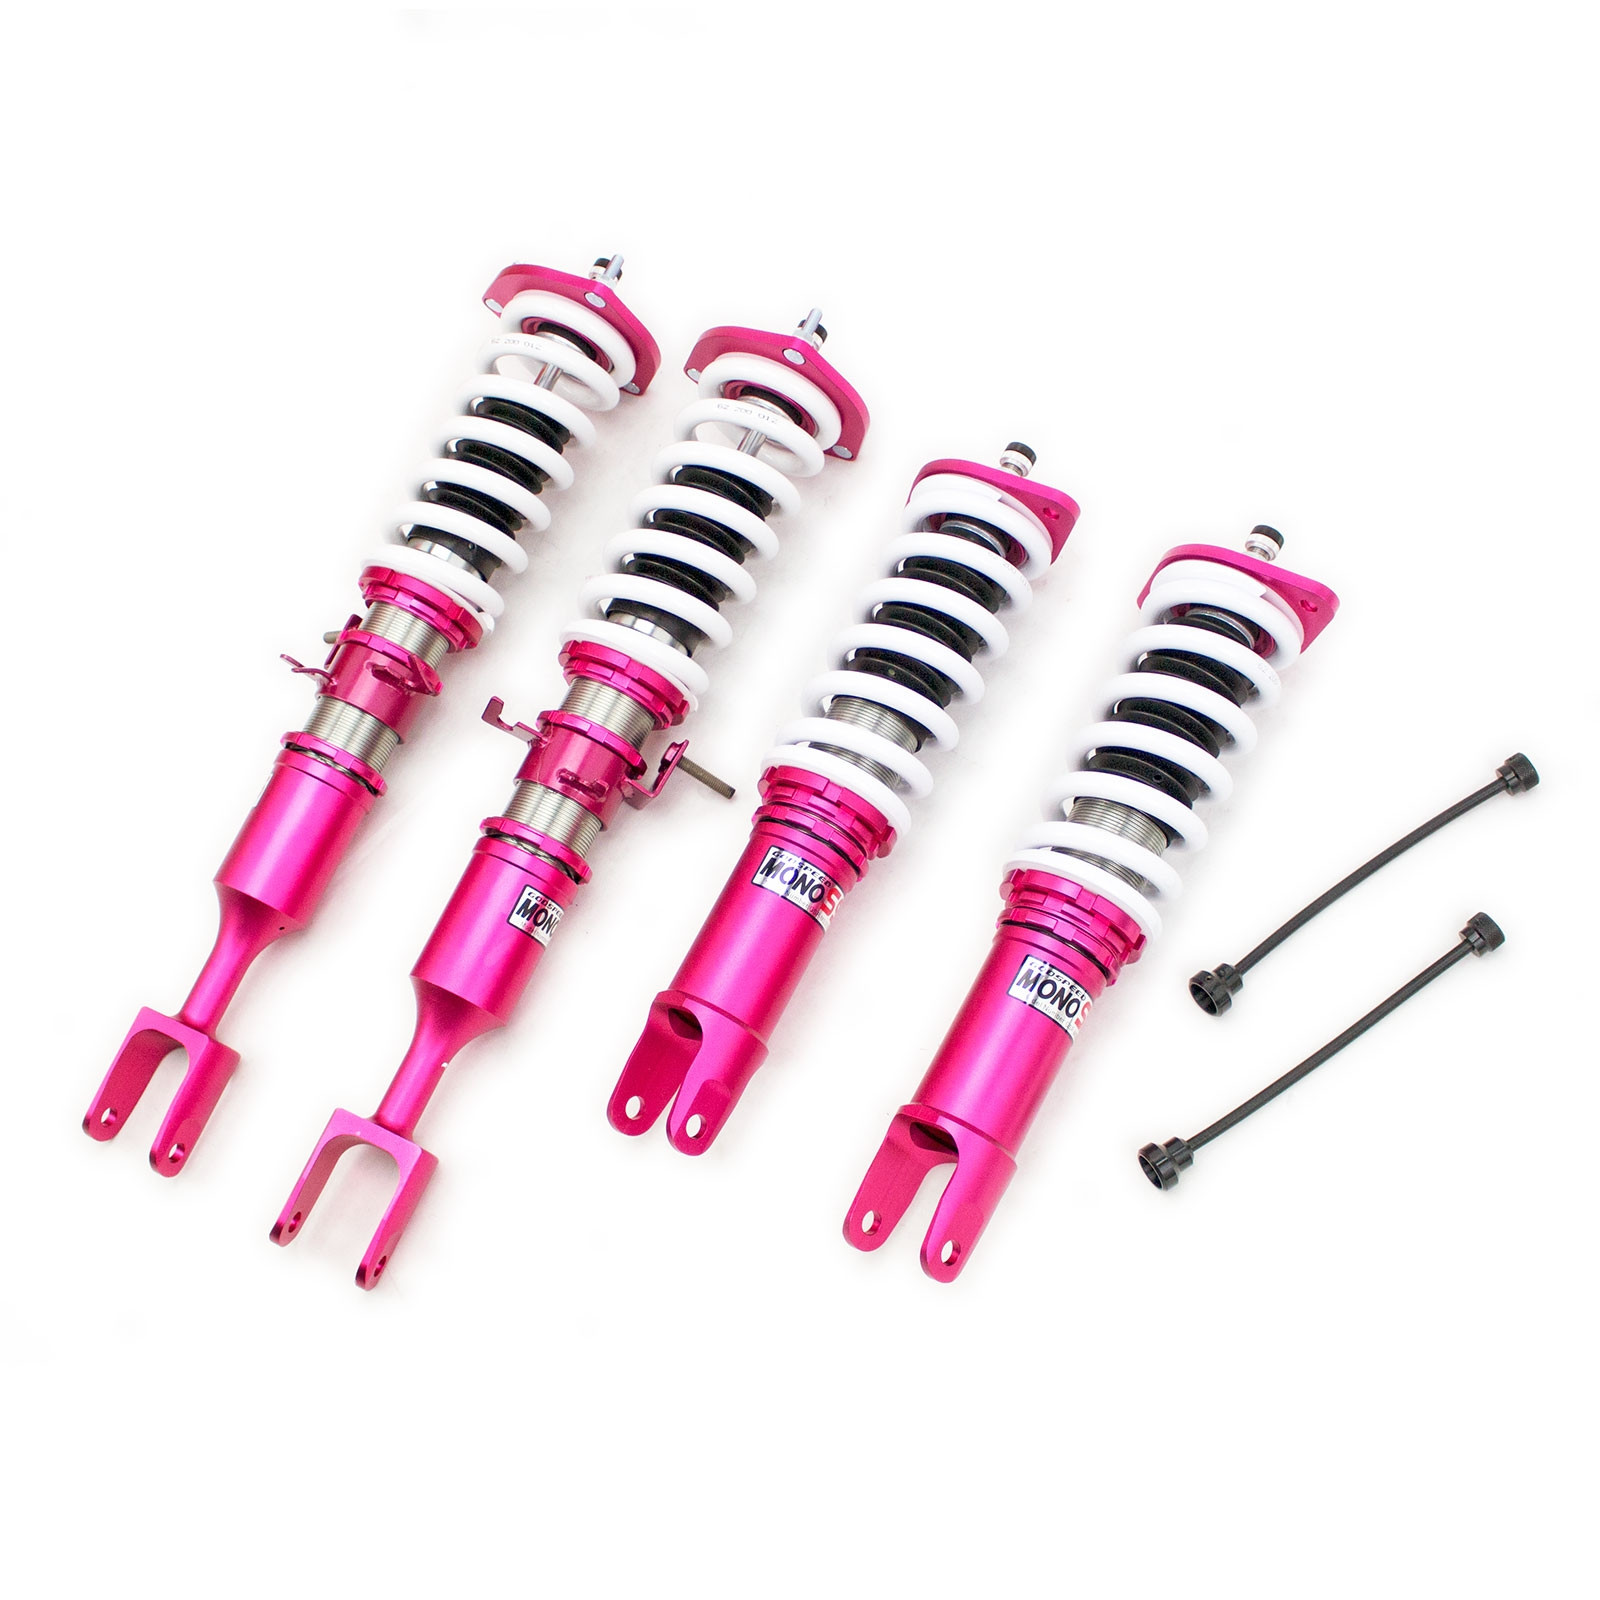 MGGRP Coilovers Lowering Suspension Kits for G35 coupe/Sedan 2003-2006 Height Adjustable 